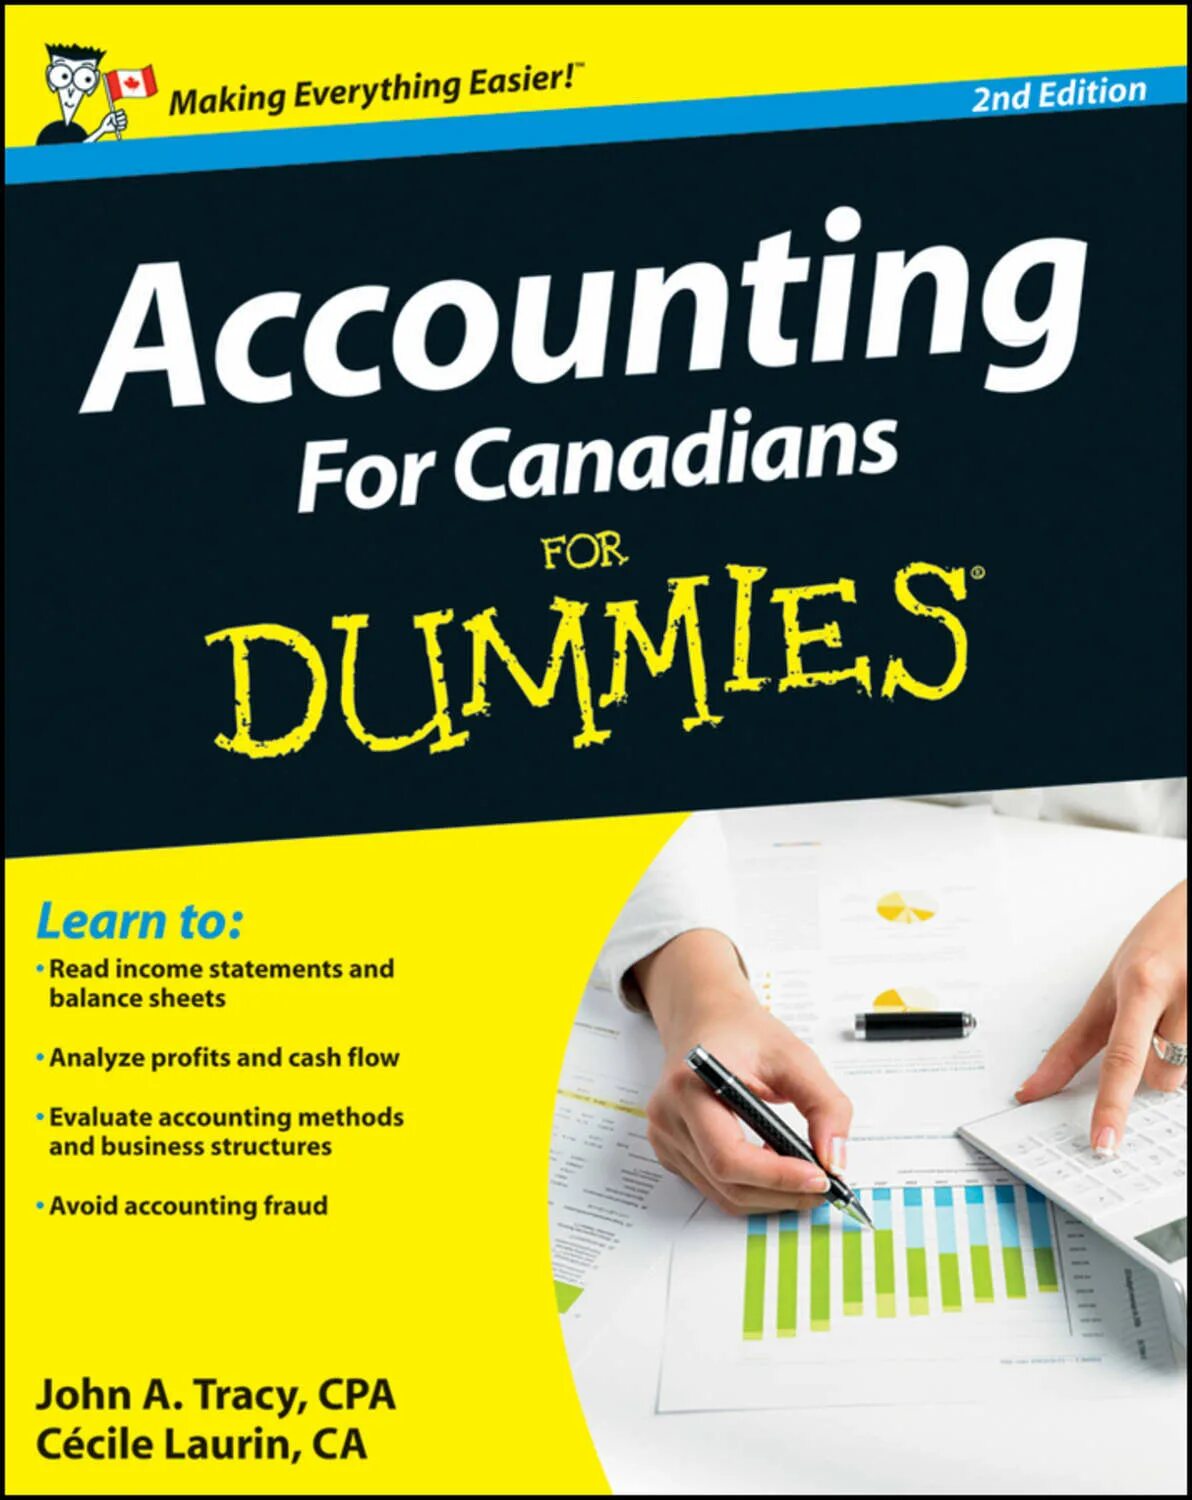 Accounting book. Accounting for Dummies. Accounting books. Books for Accountants. Account book.